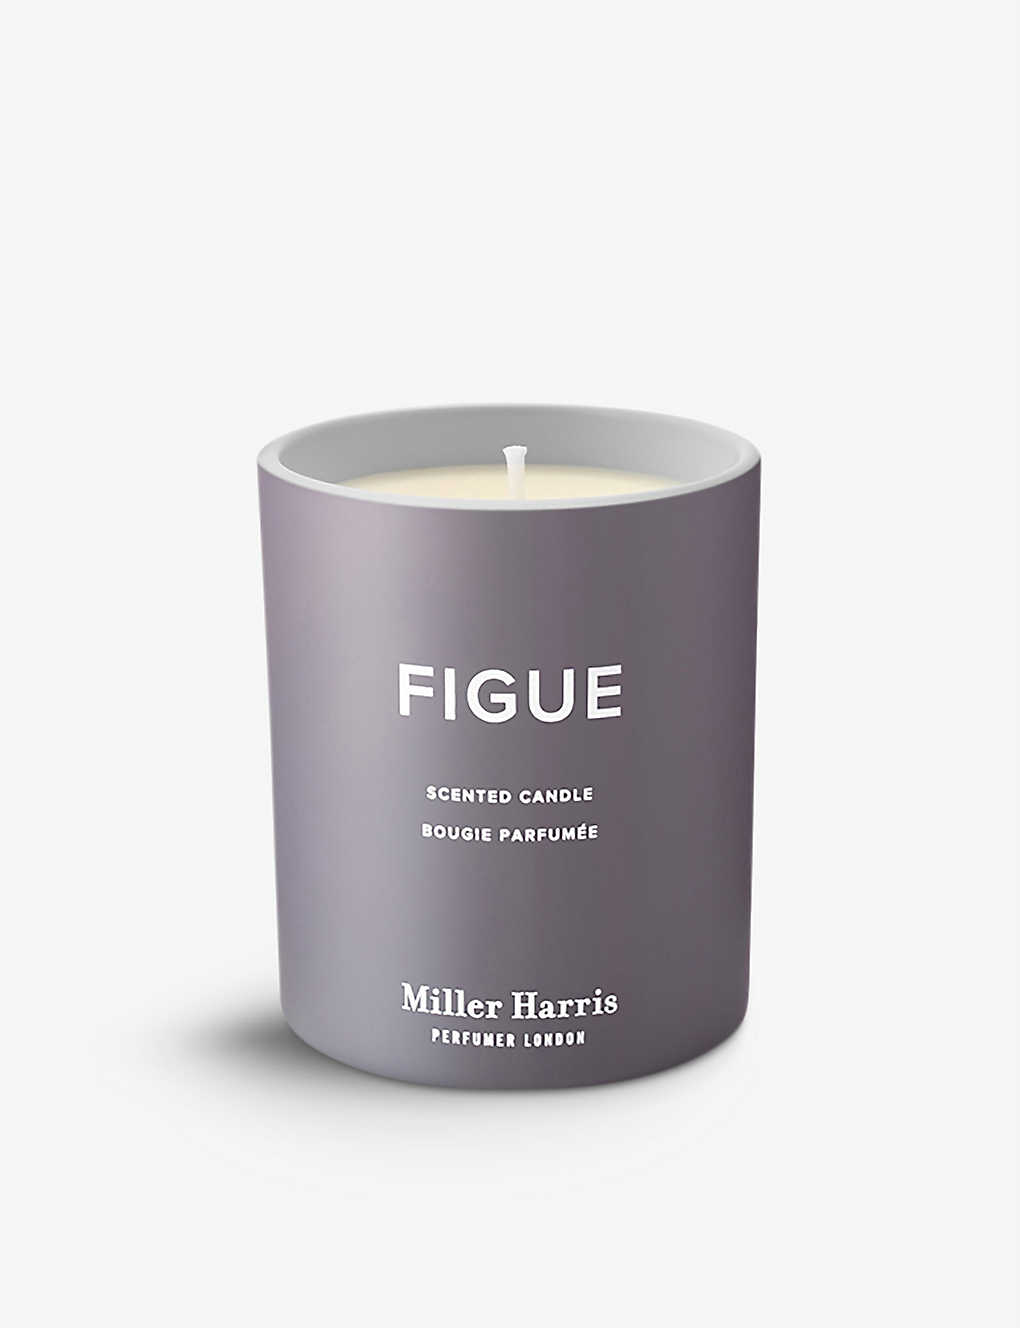 Miller Harris Figue Natural Wax Scented Candle 220g